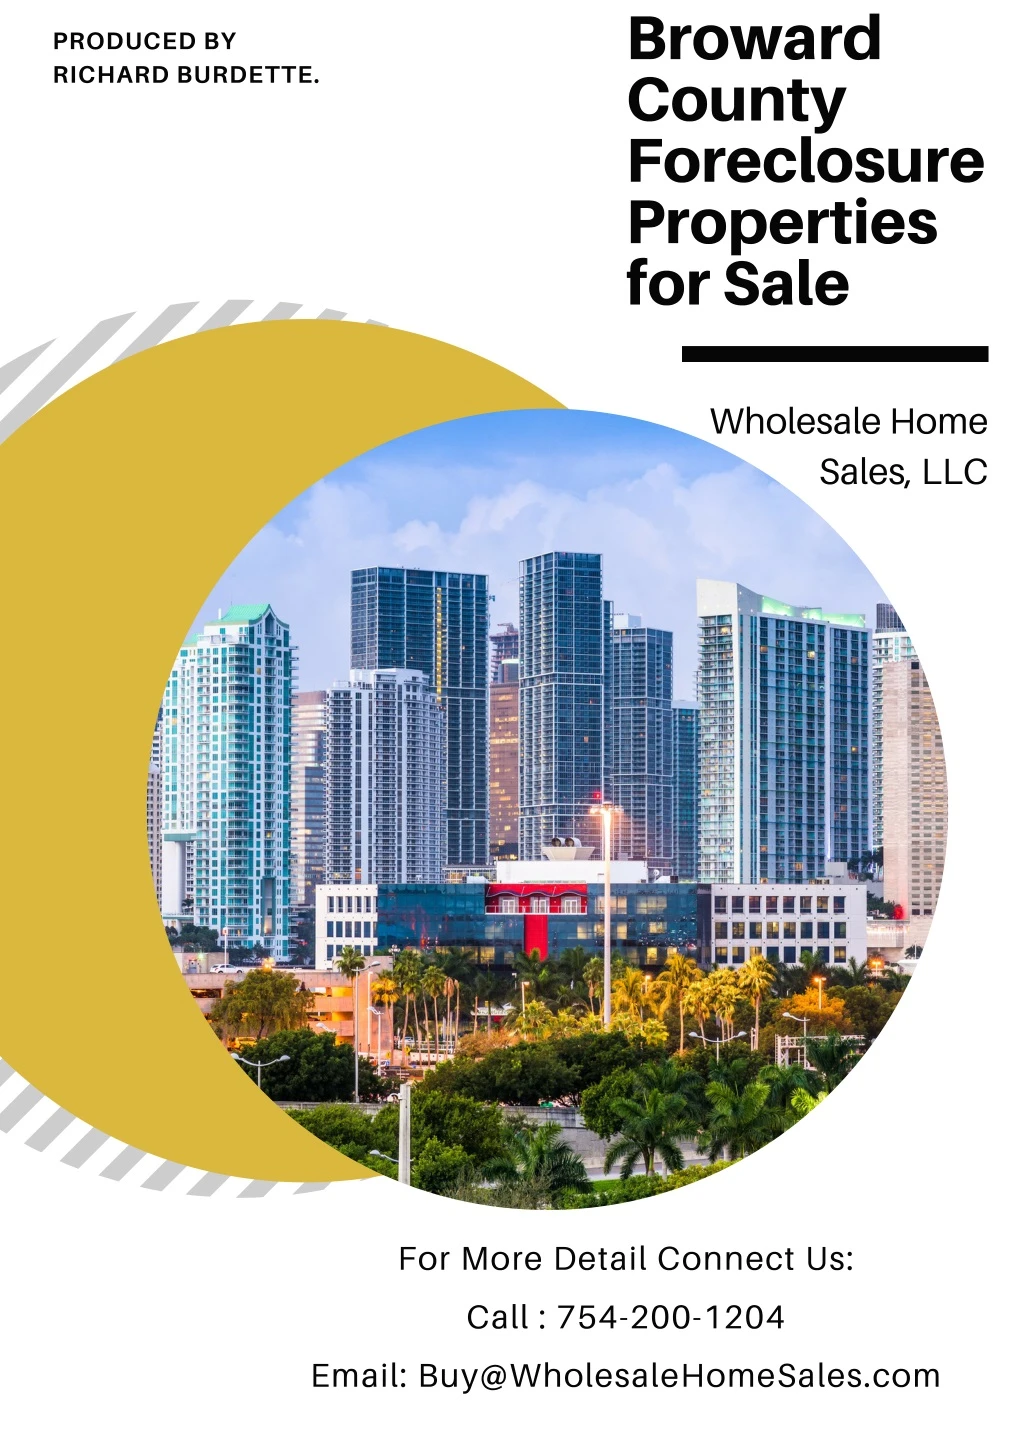 broward county foreclosure properties for sale